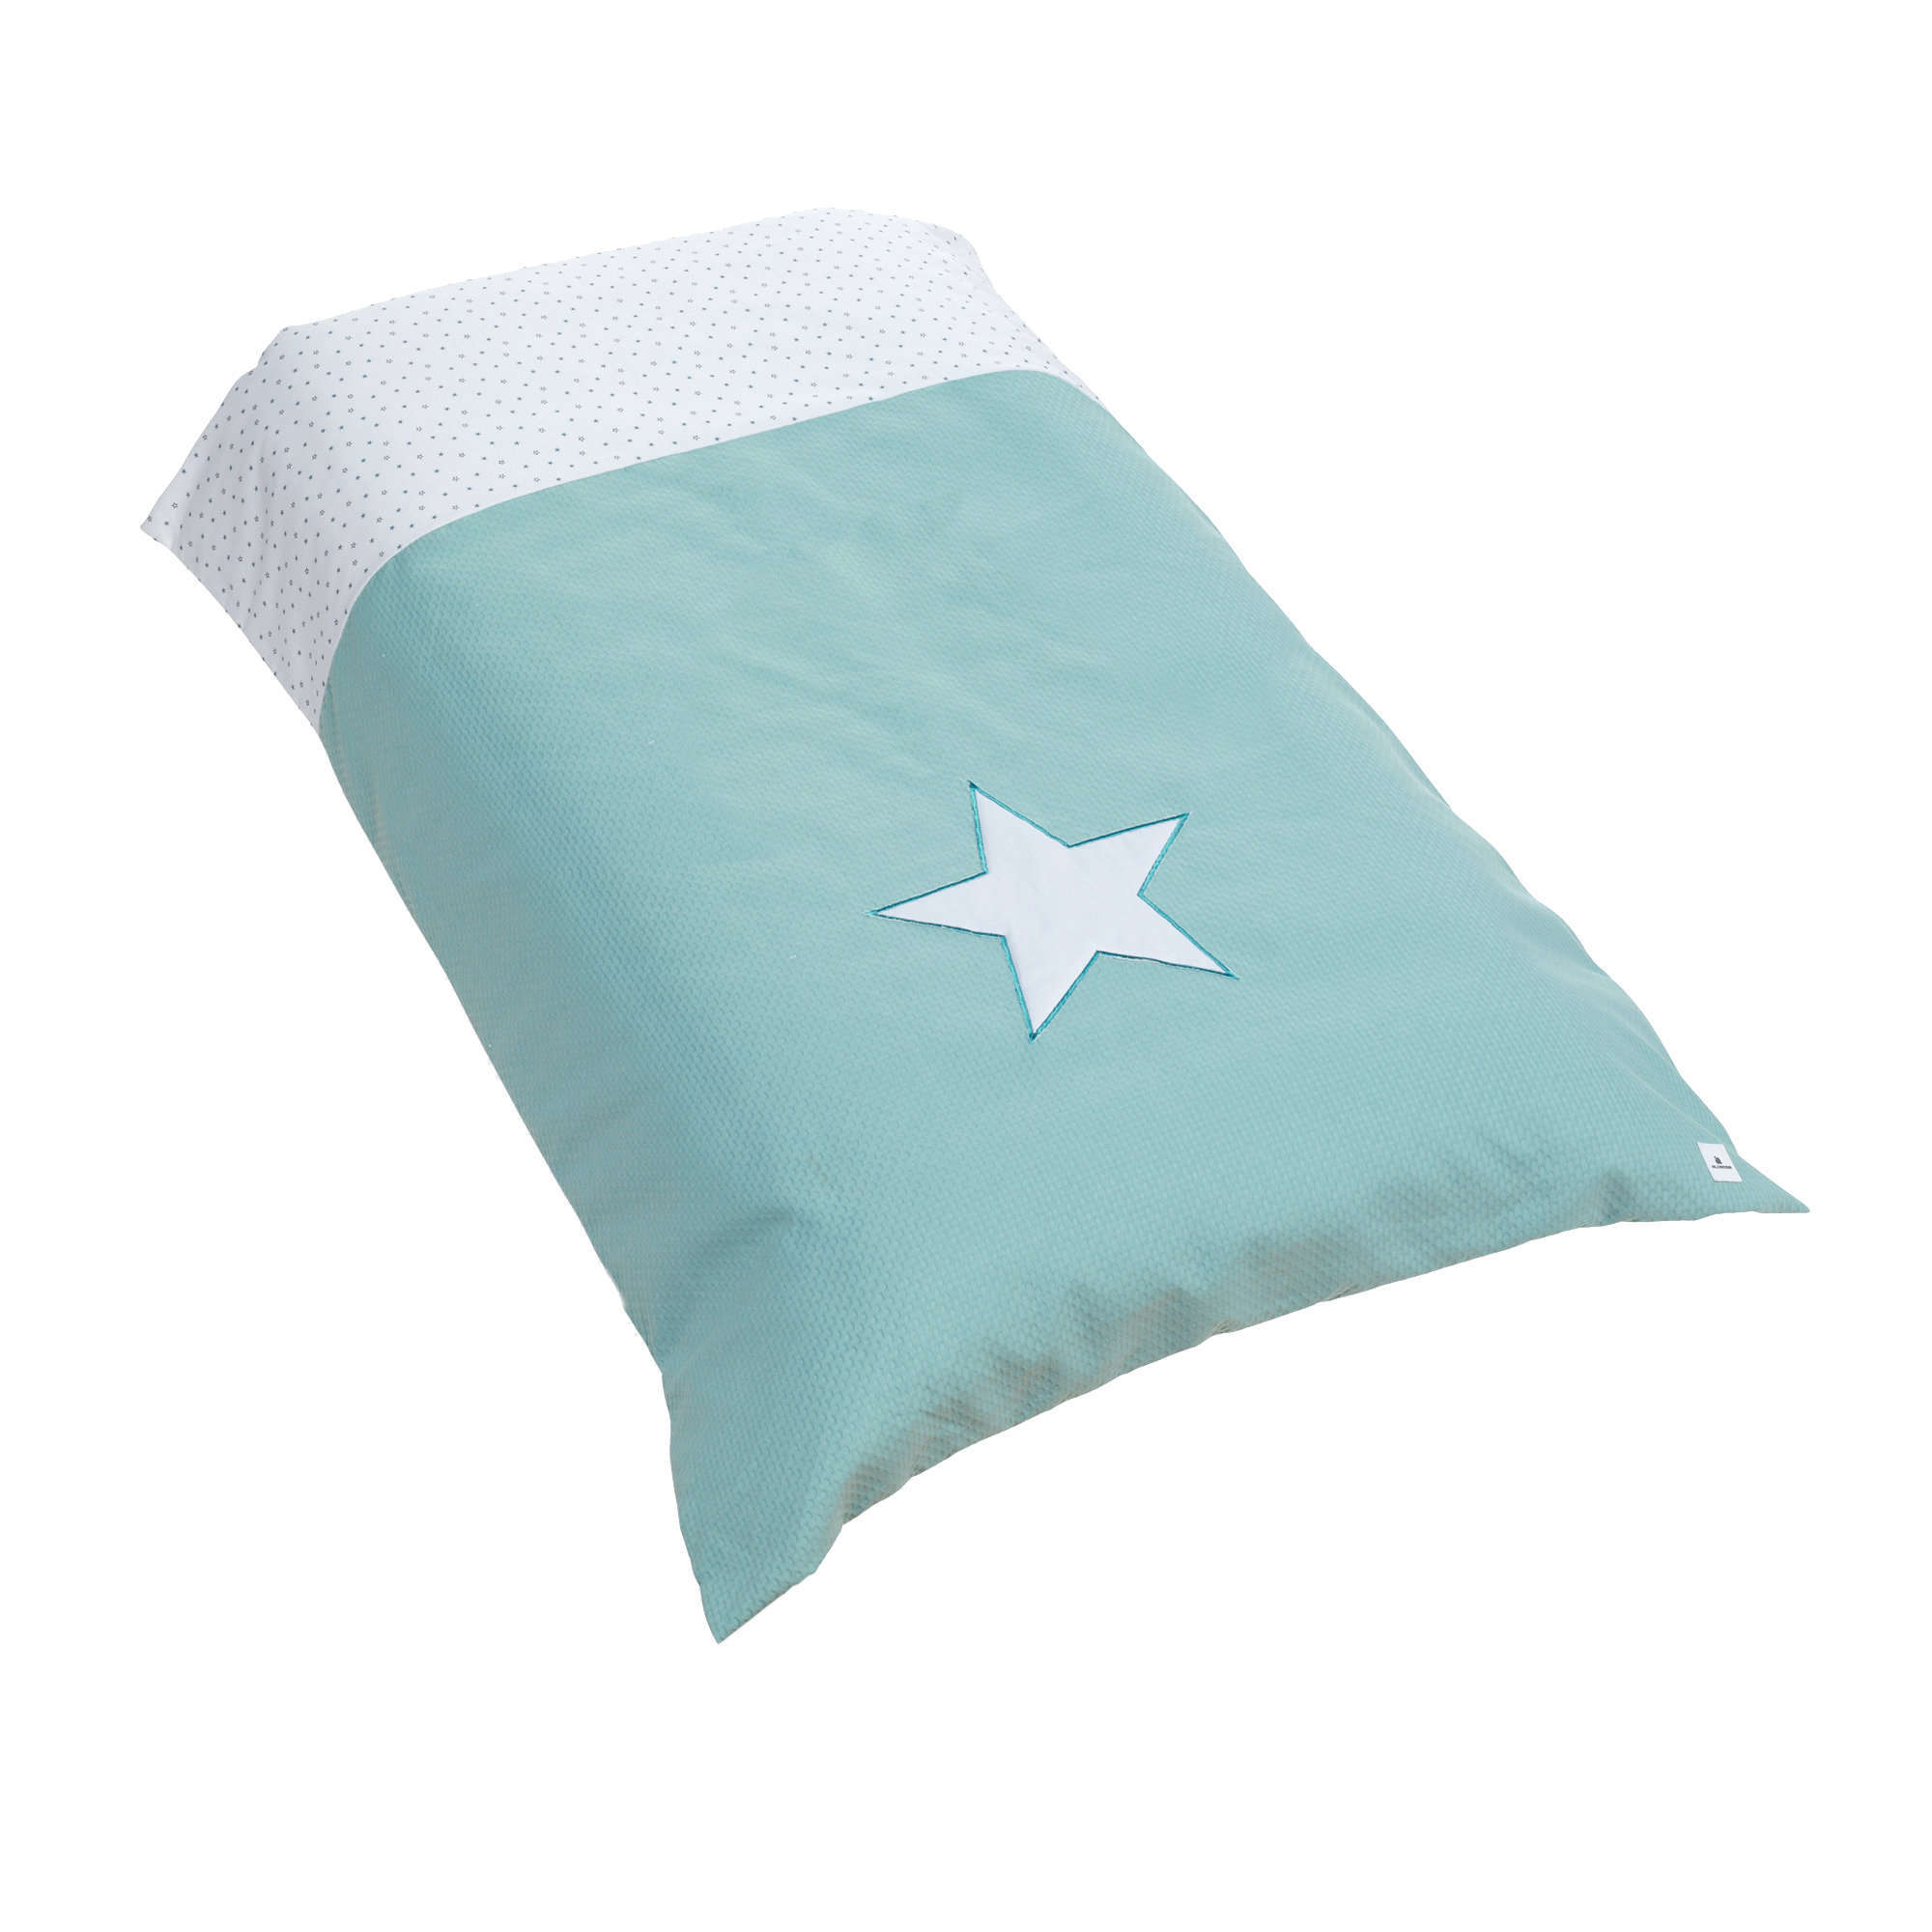 Cot duvet with removable filling 60x120